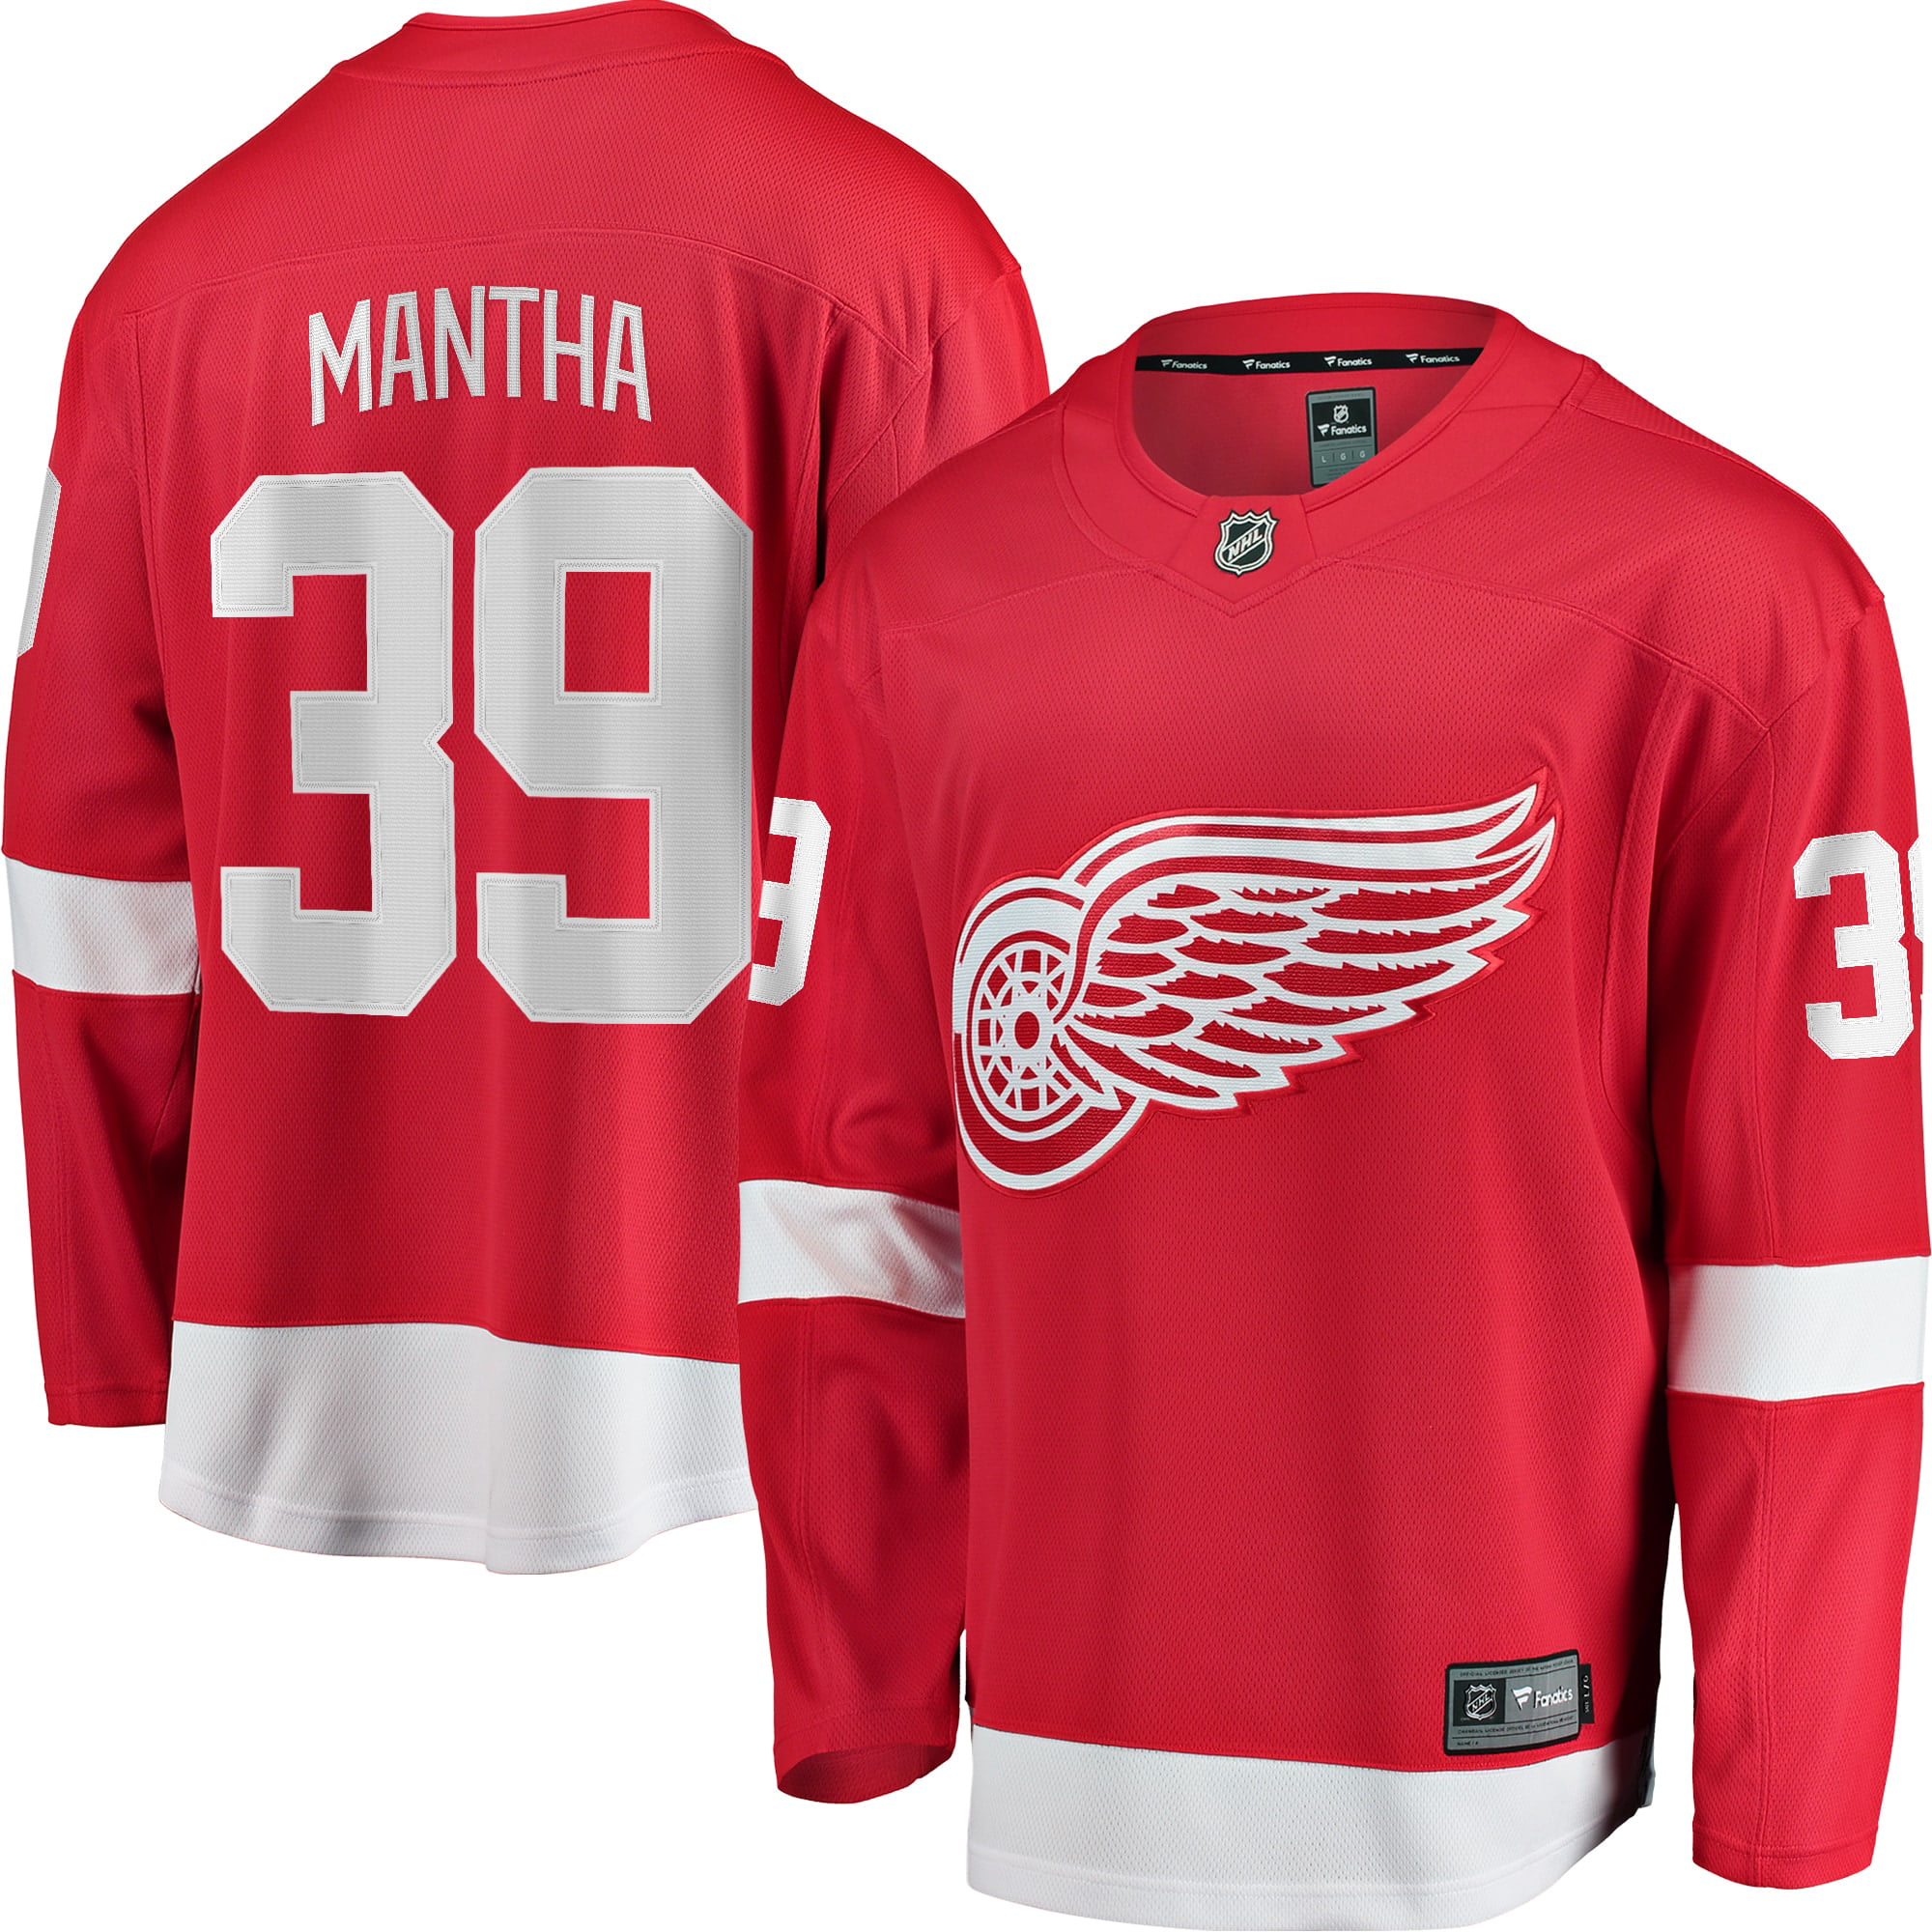 detroit red wings toddler jersey